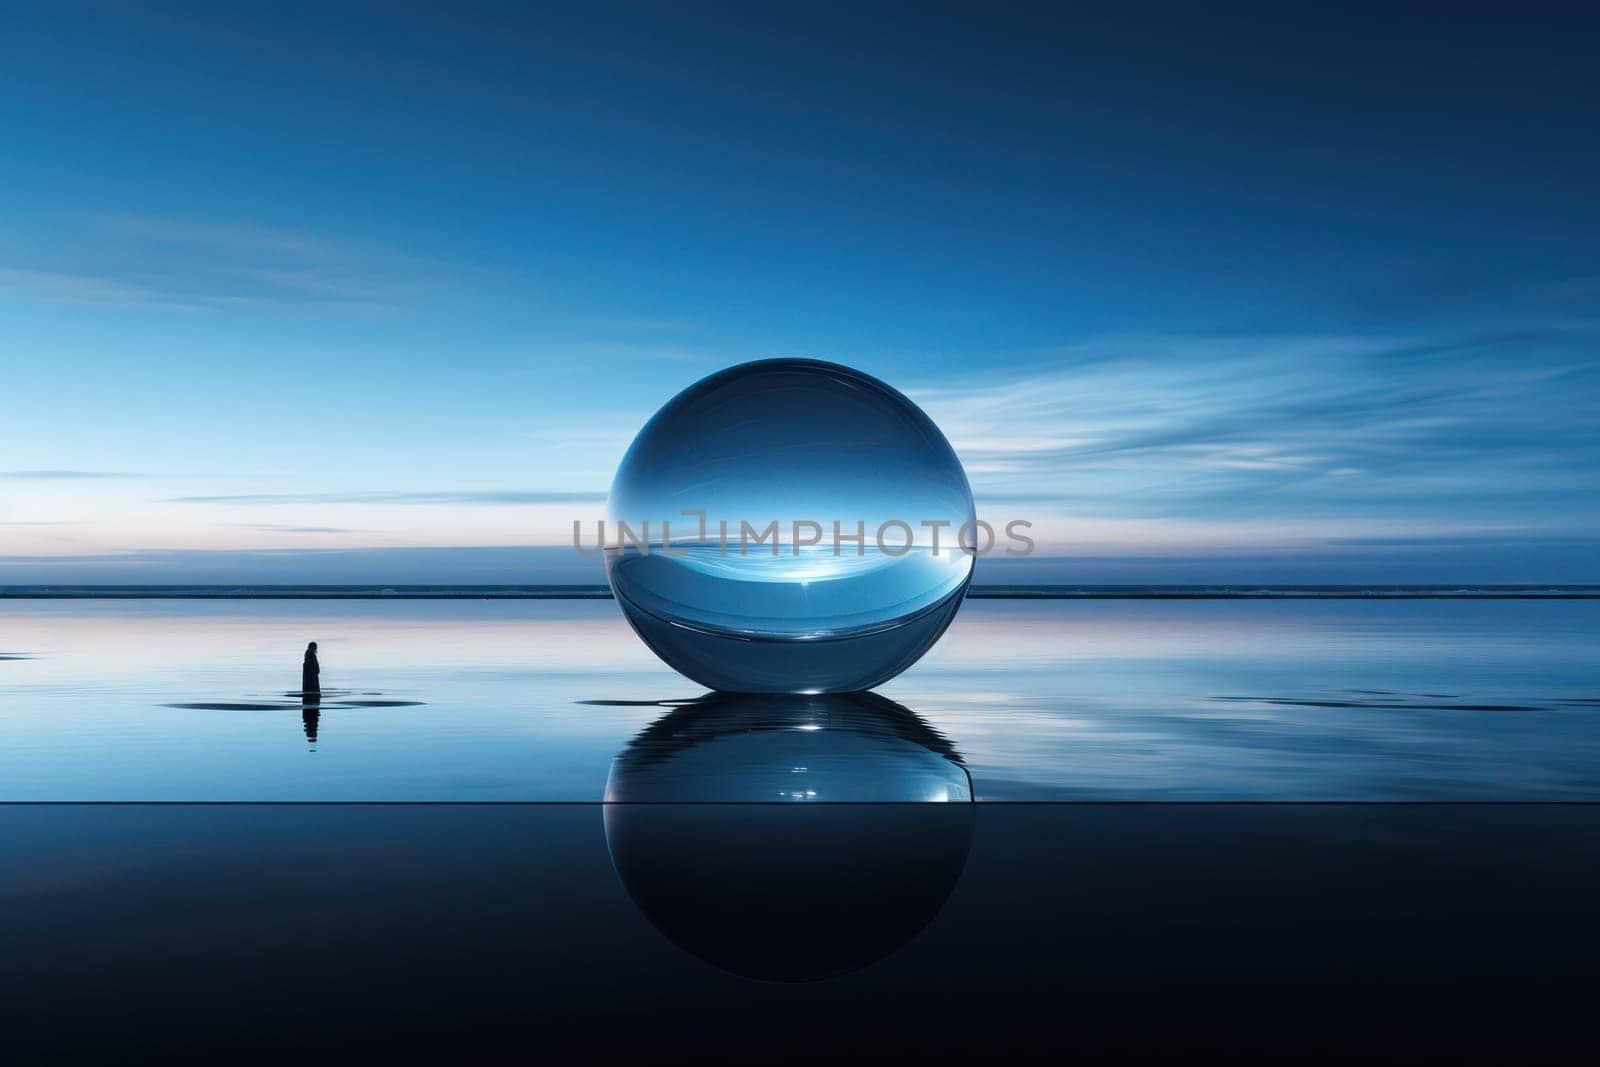 Sunset Sphere: Tranquil Beauty of Nature Reflected in Crystal Ball over the Serene Ocean